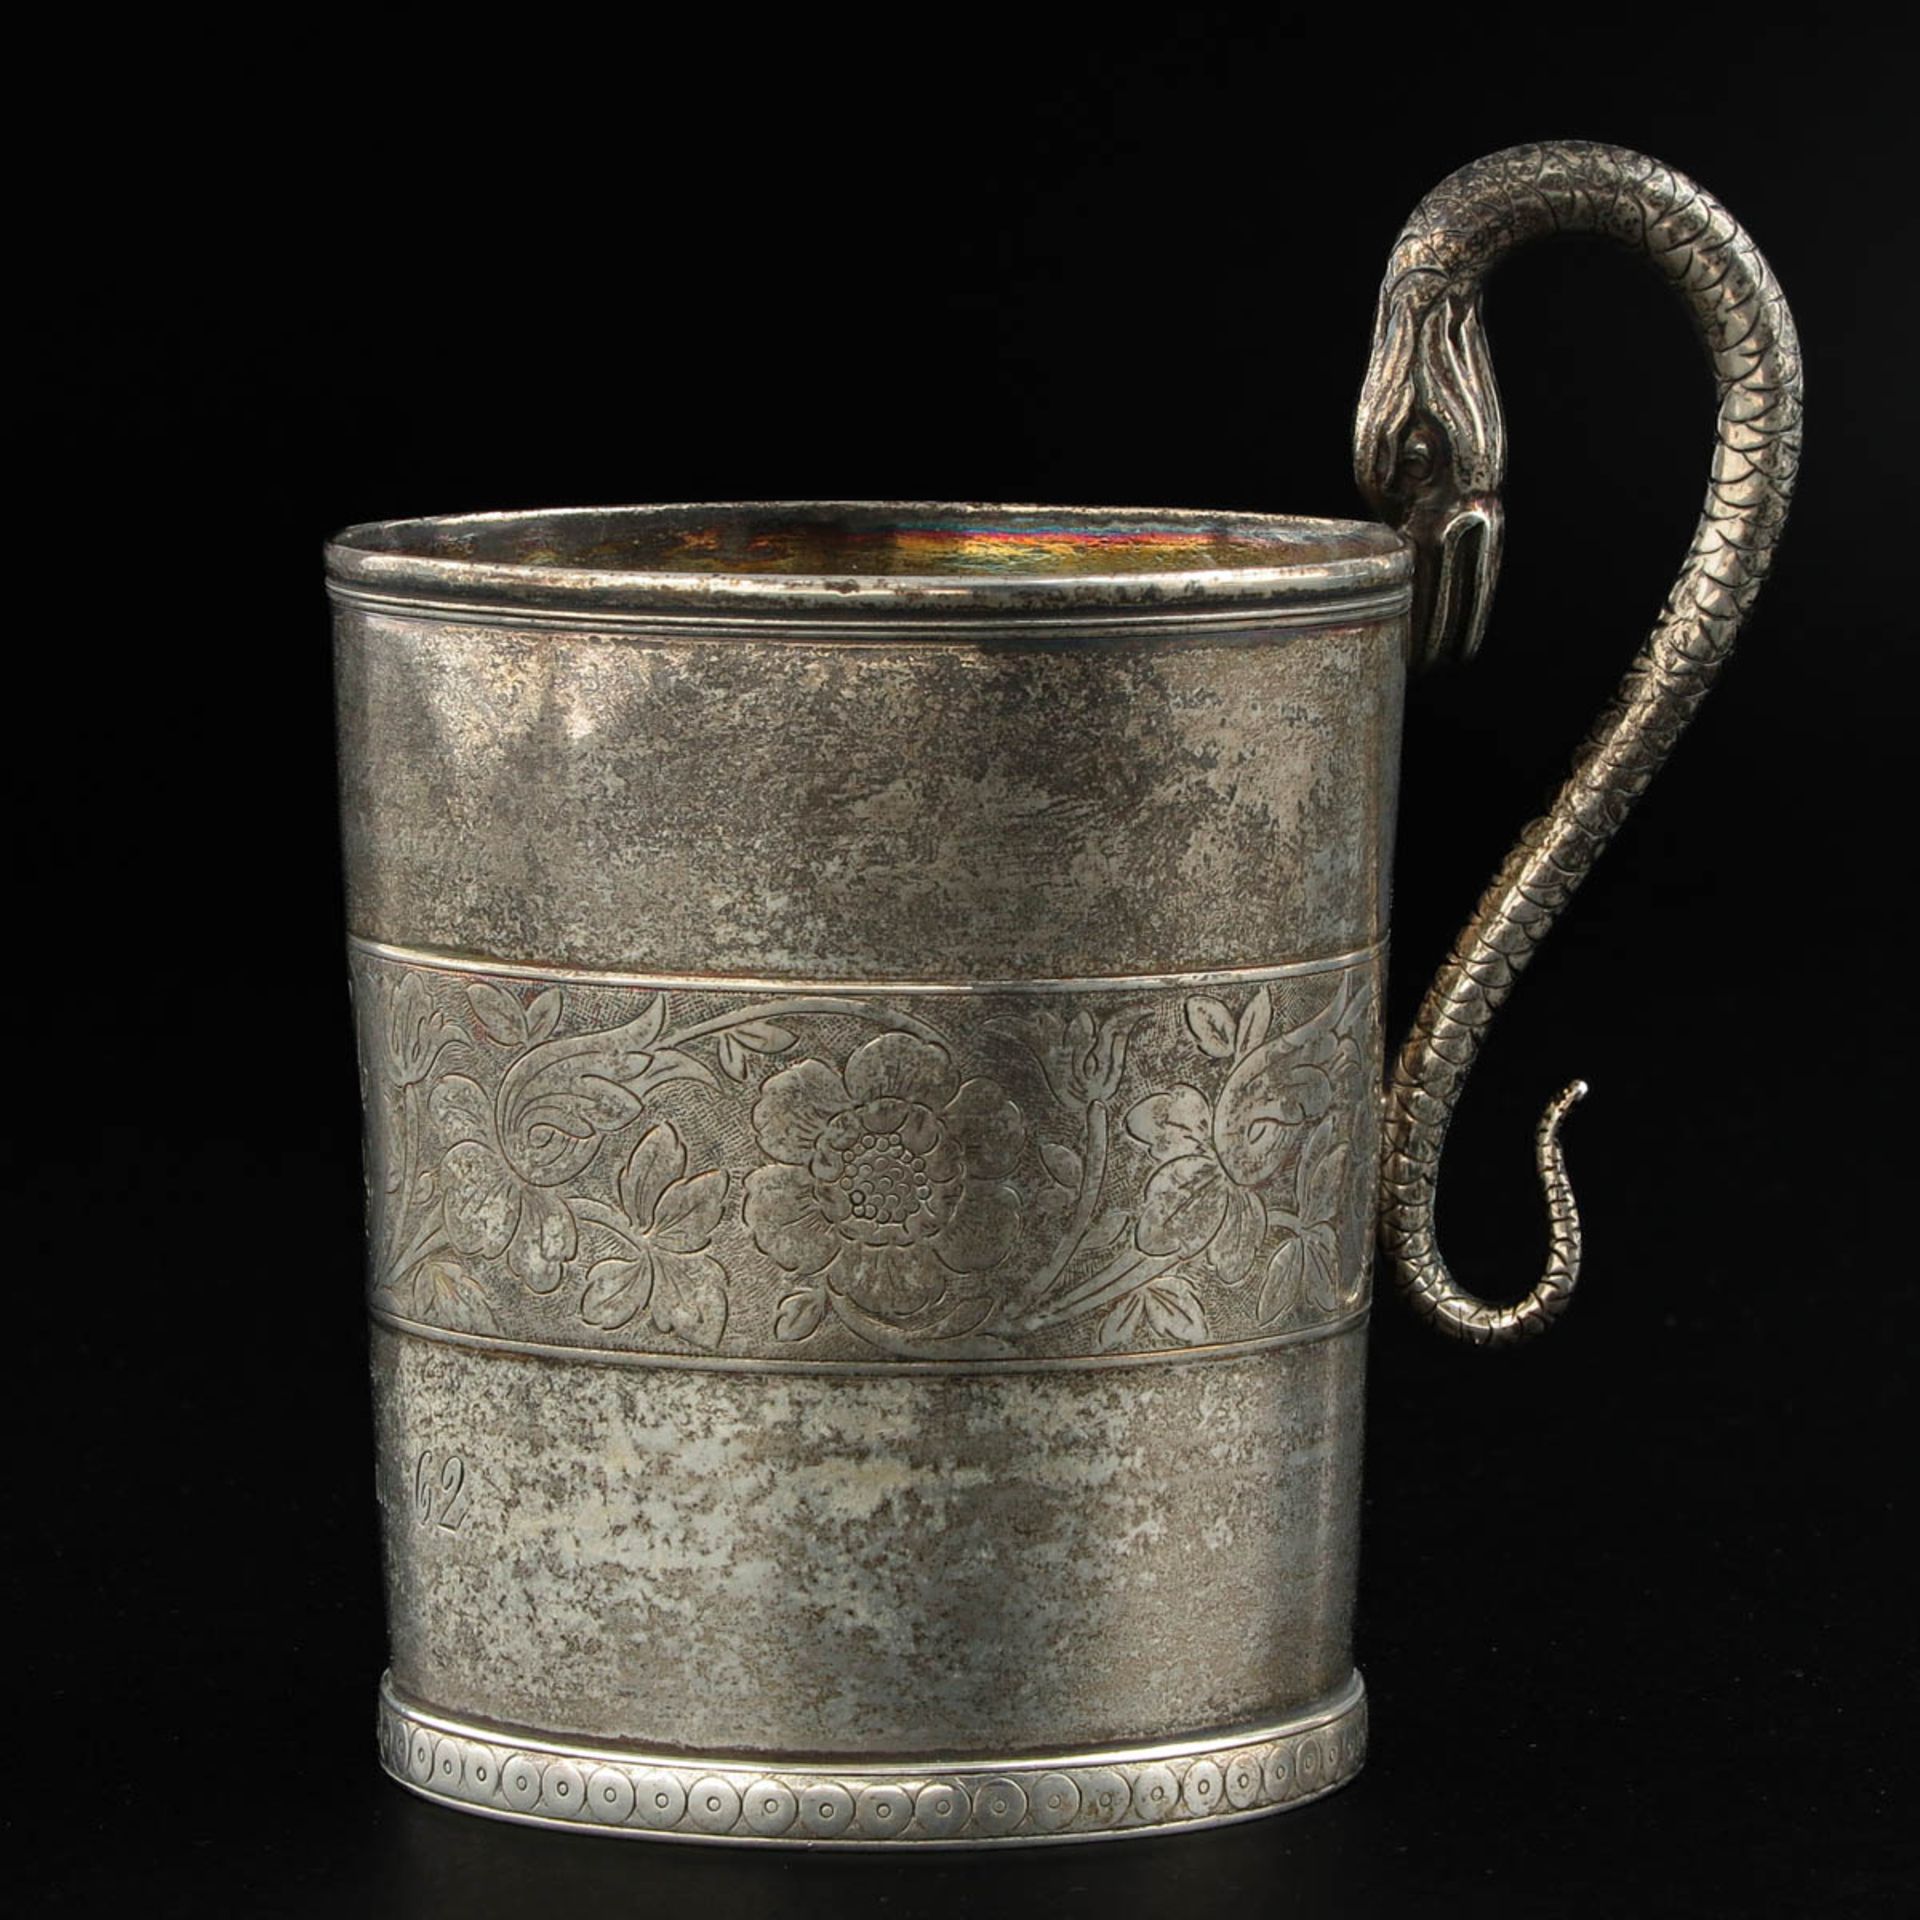 A Silver Cup